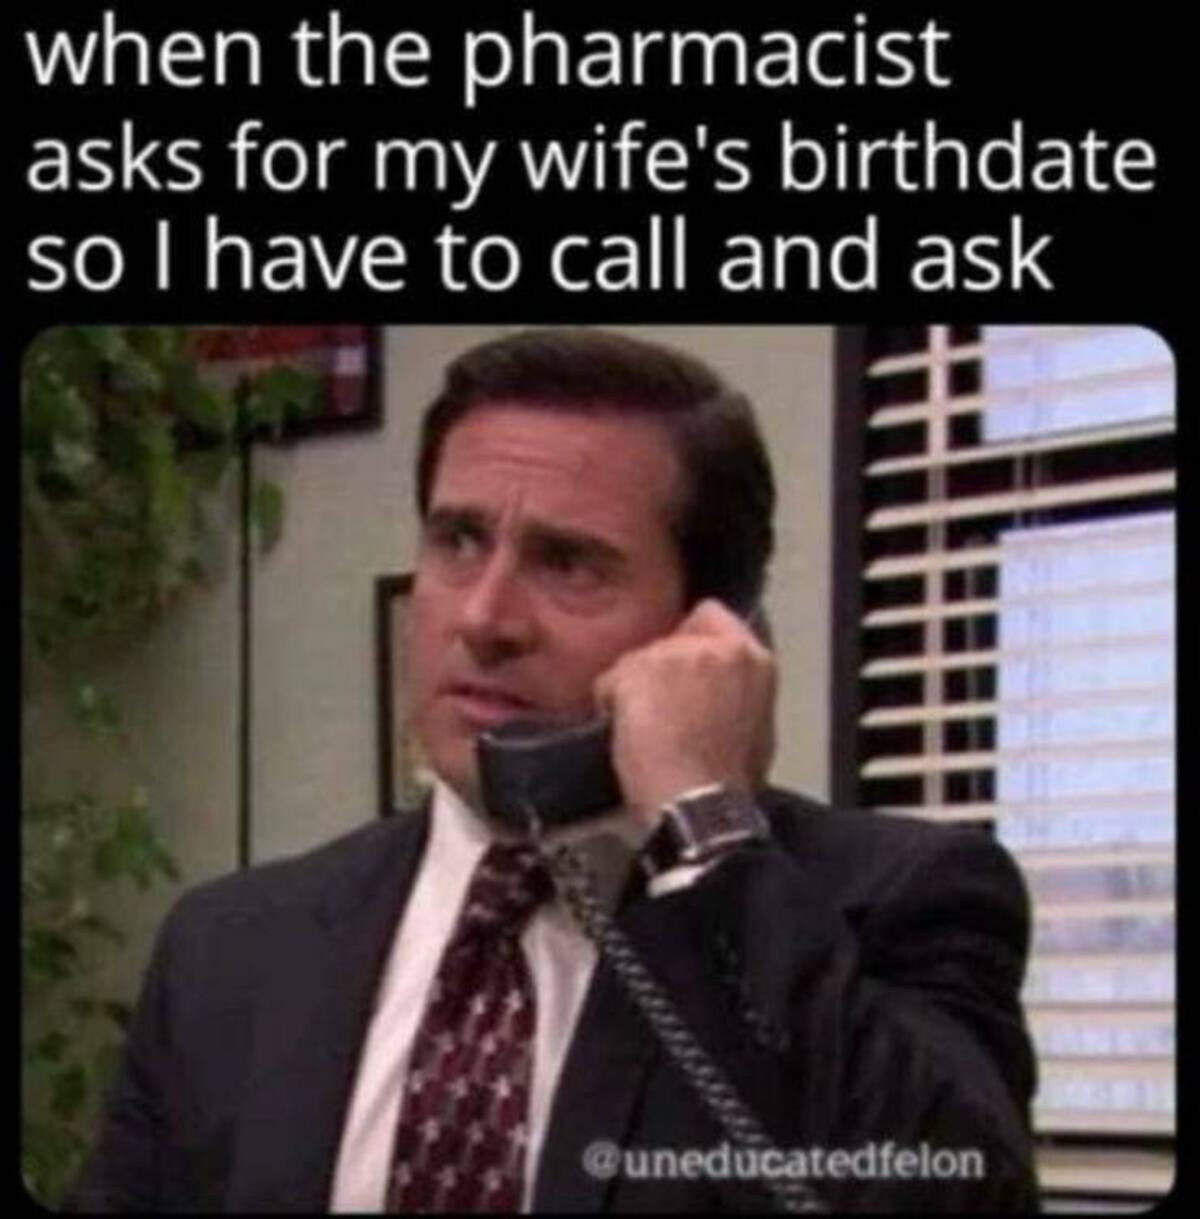 photo caption - when the pharmacist asks for my wife's birthdate so I have to call and ask